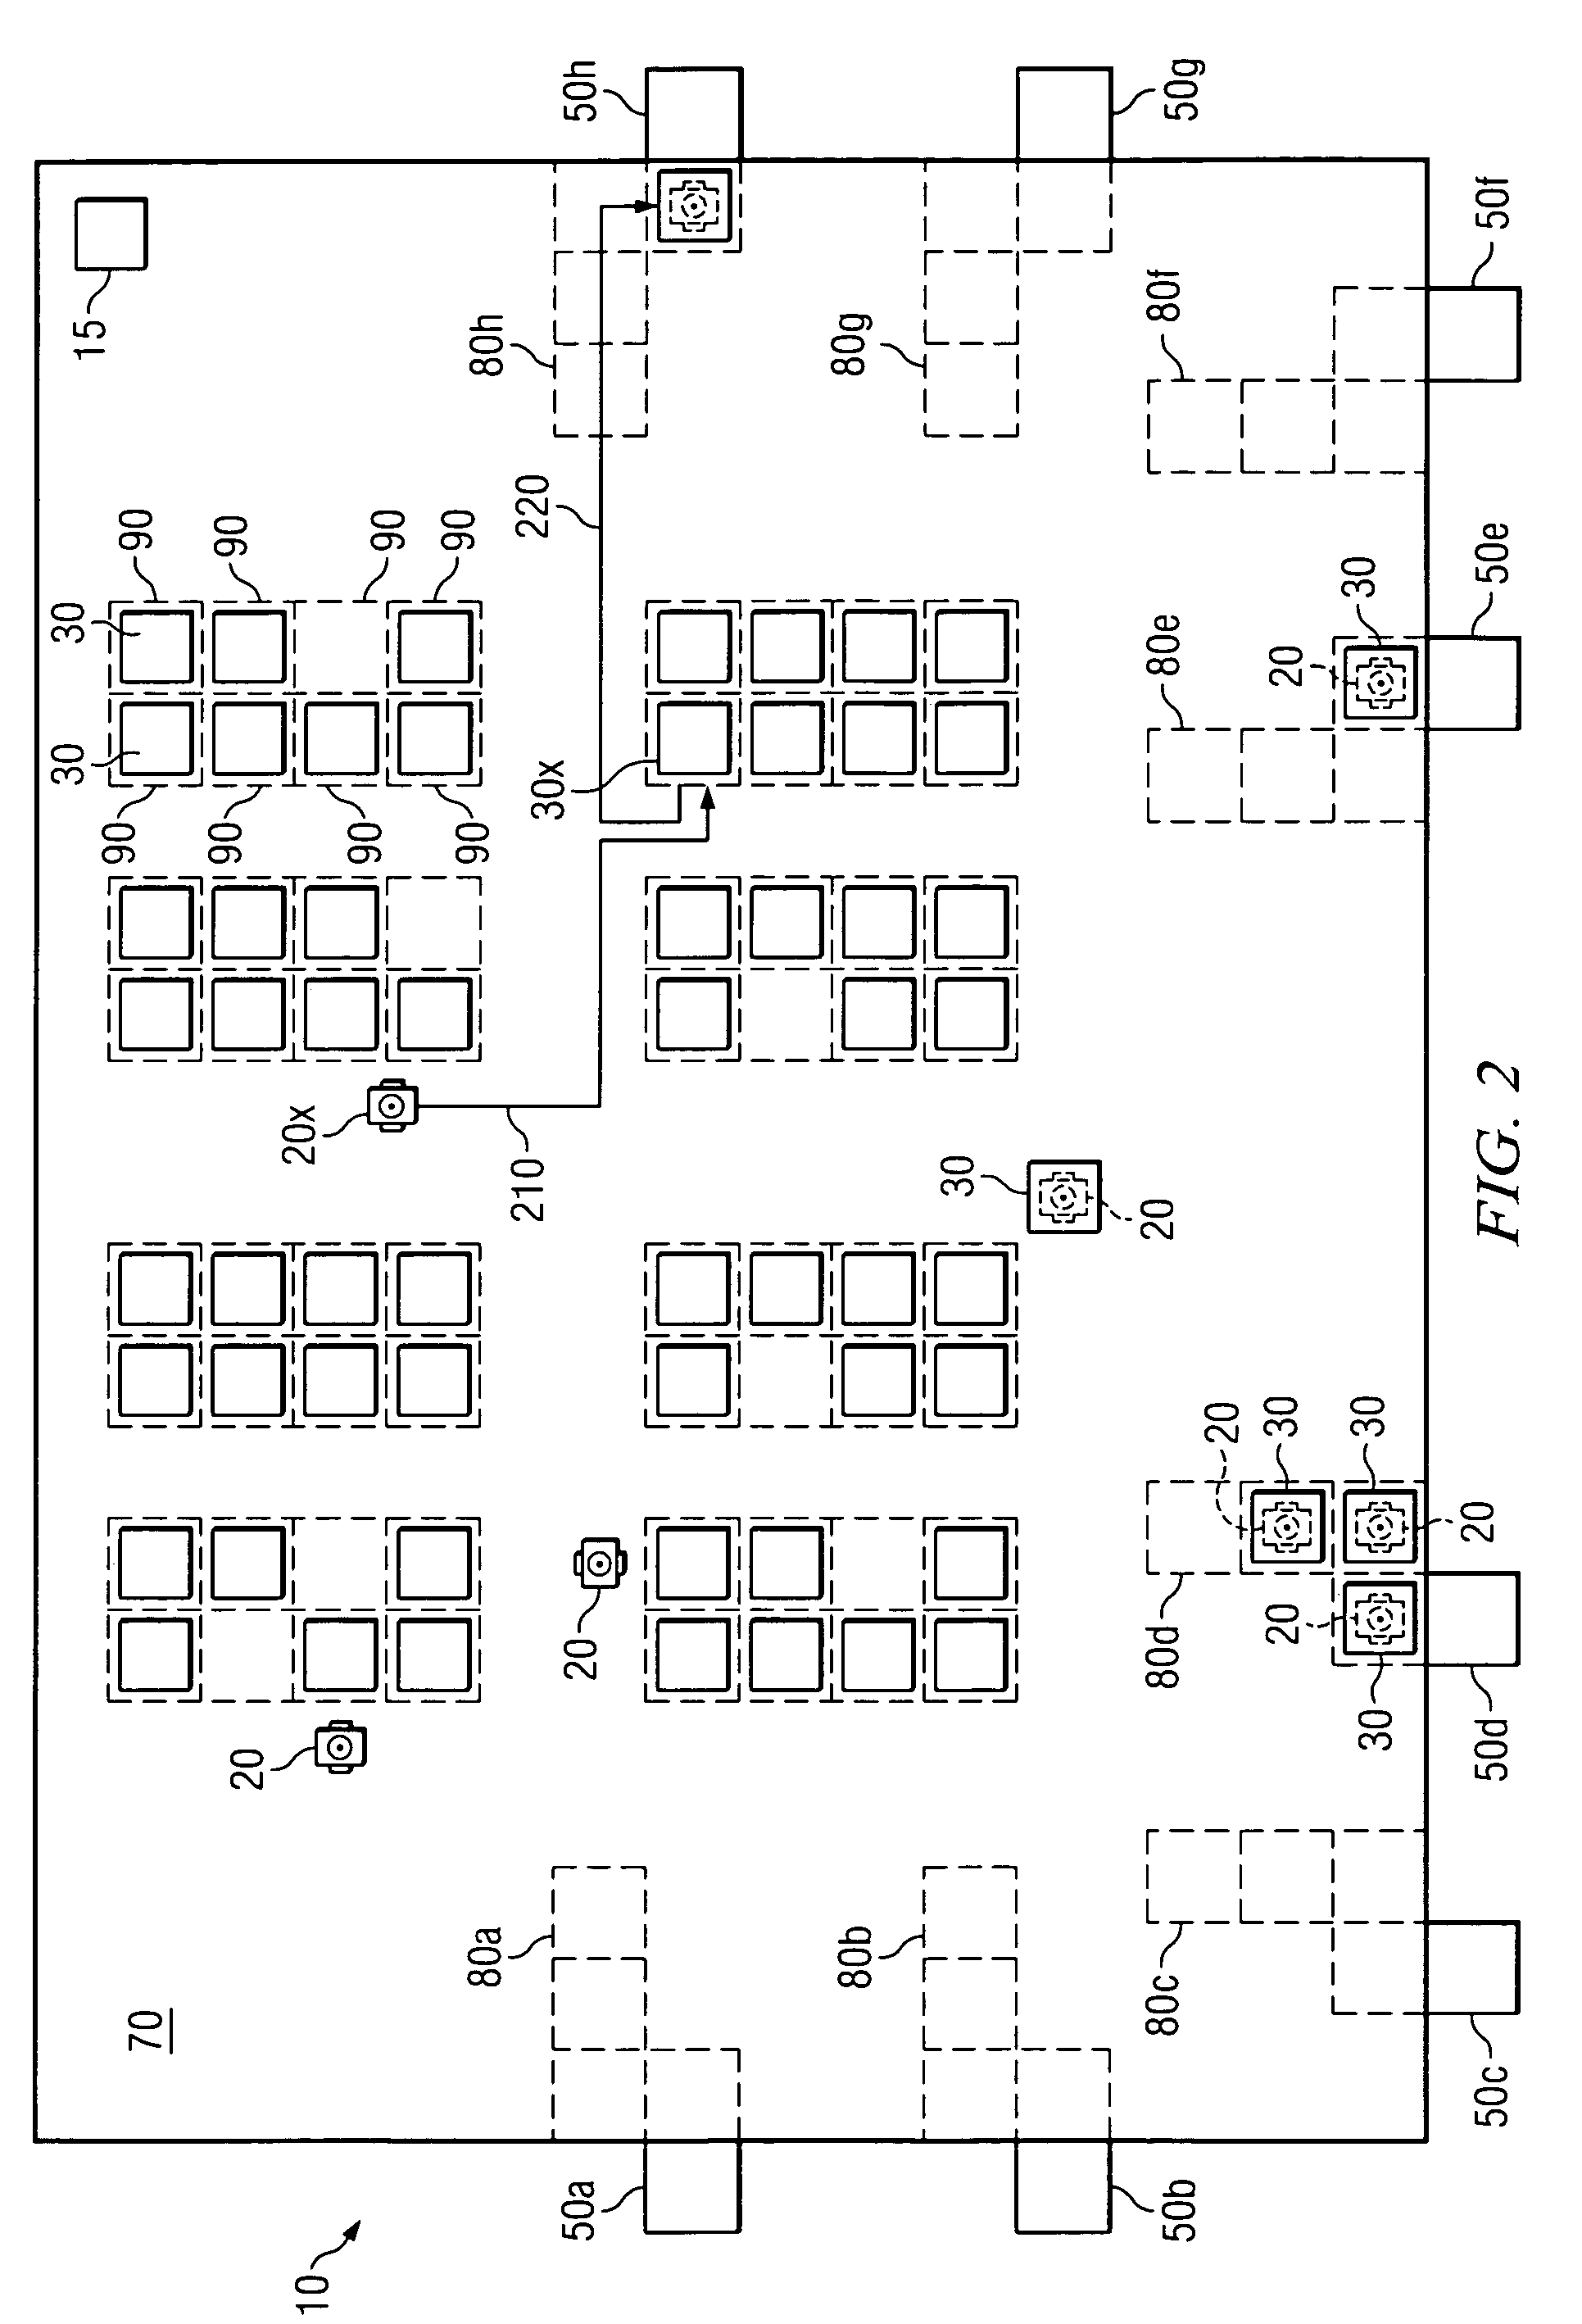 Method and system for retrieving inventory items